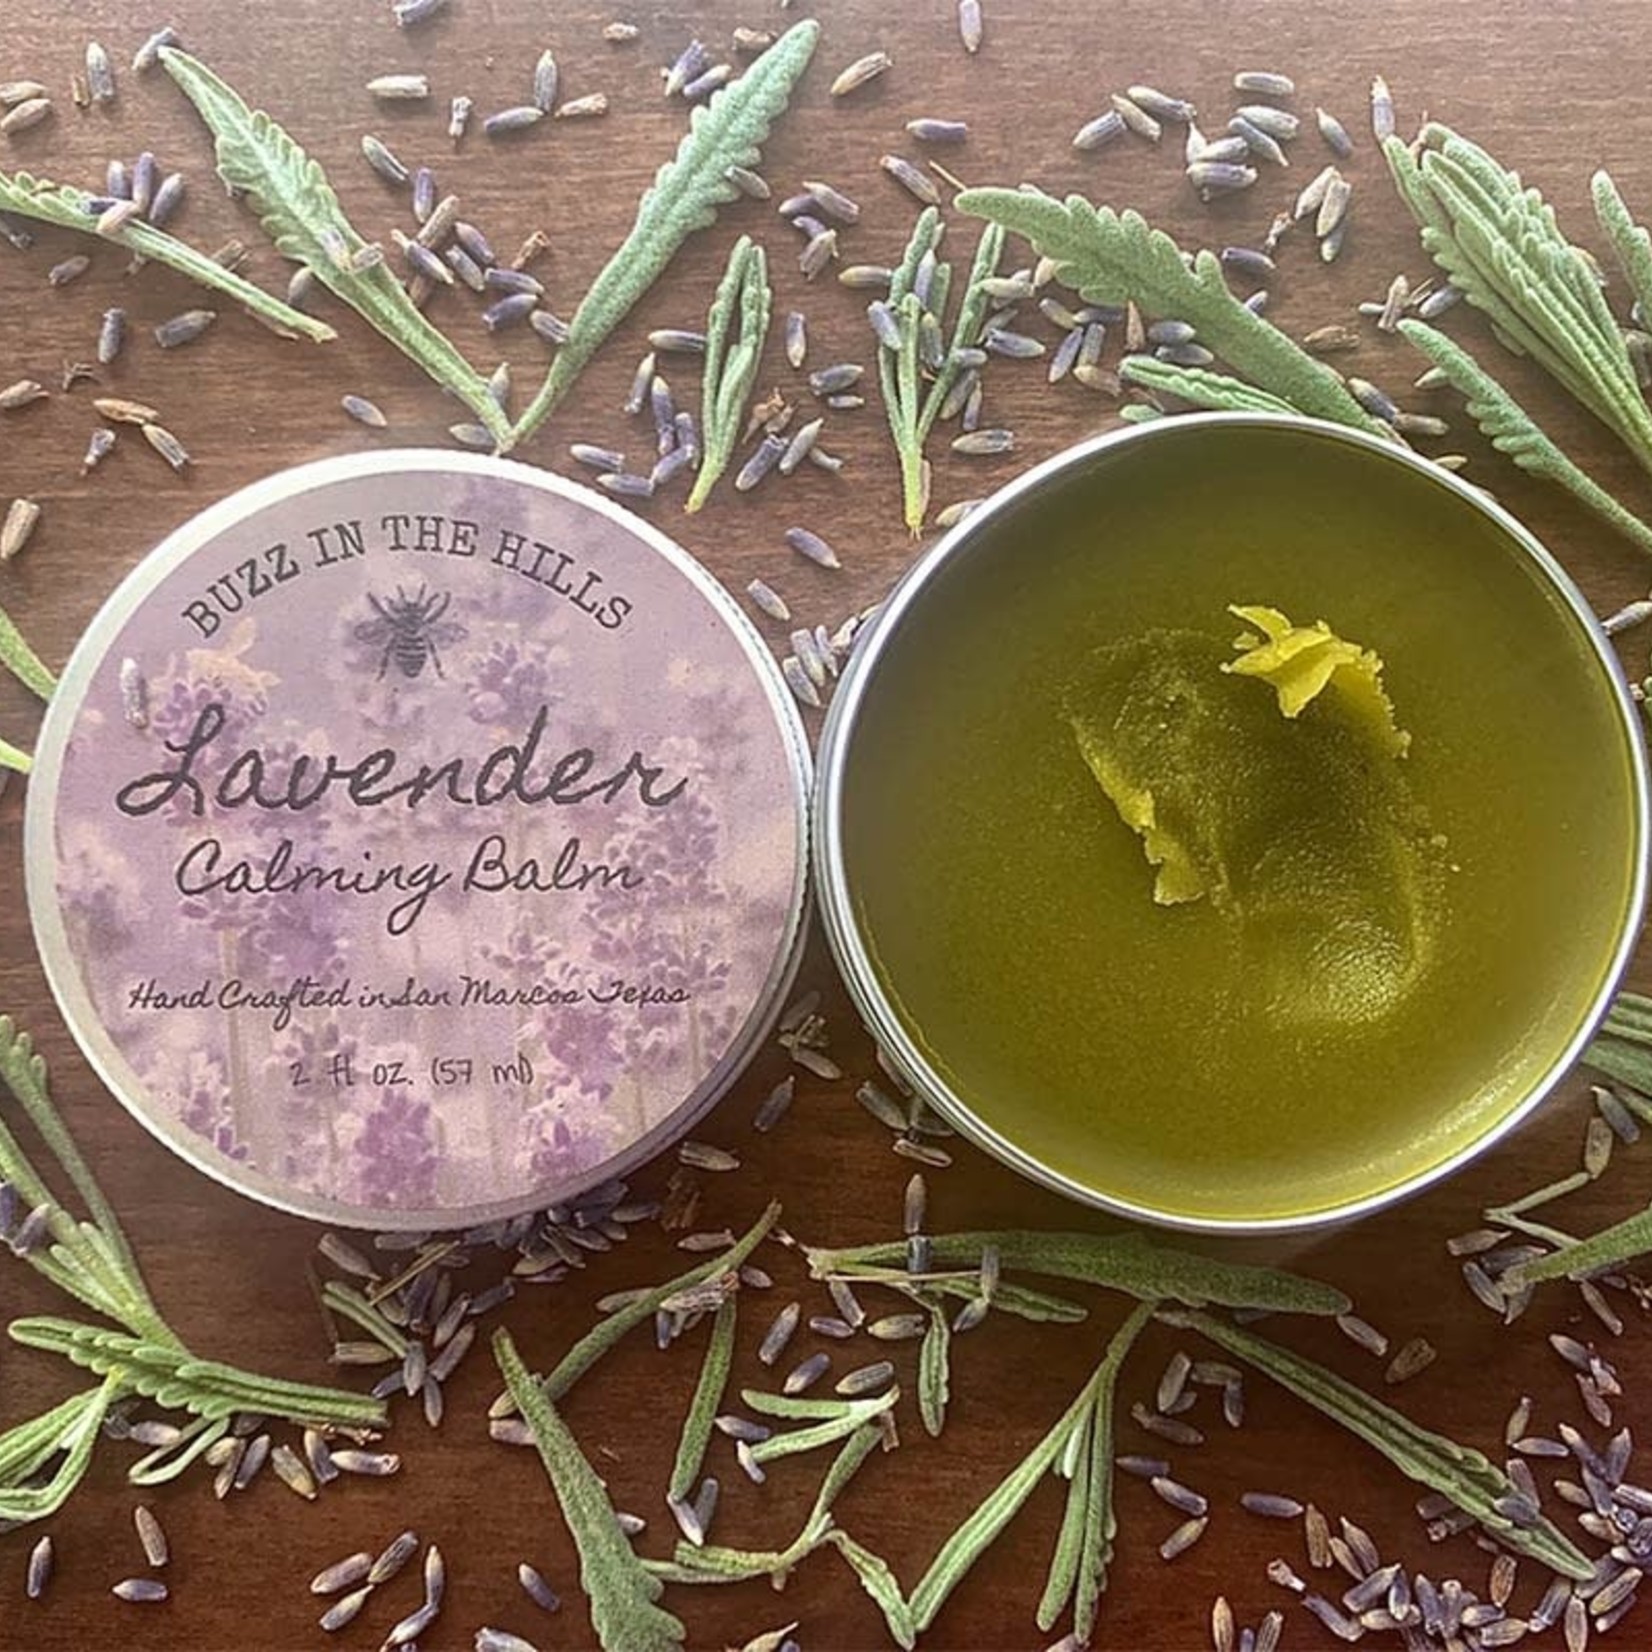 Buzz in the Hills Lavender Salve by Buzz in the Hills